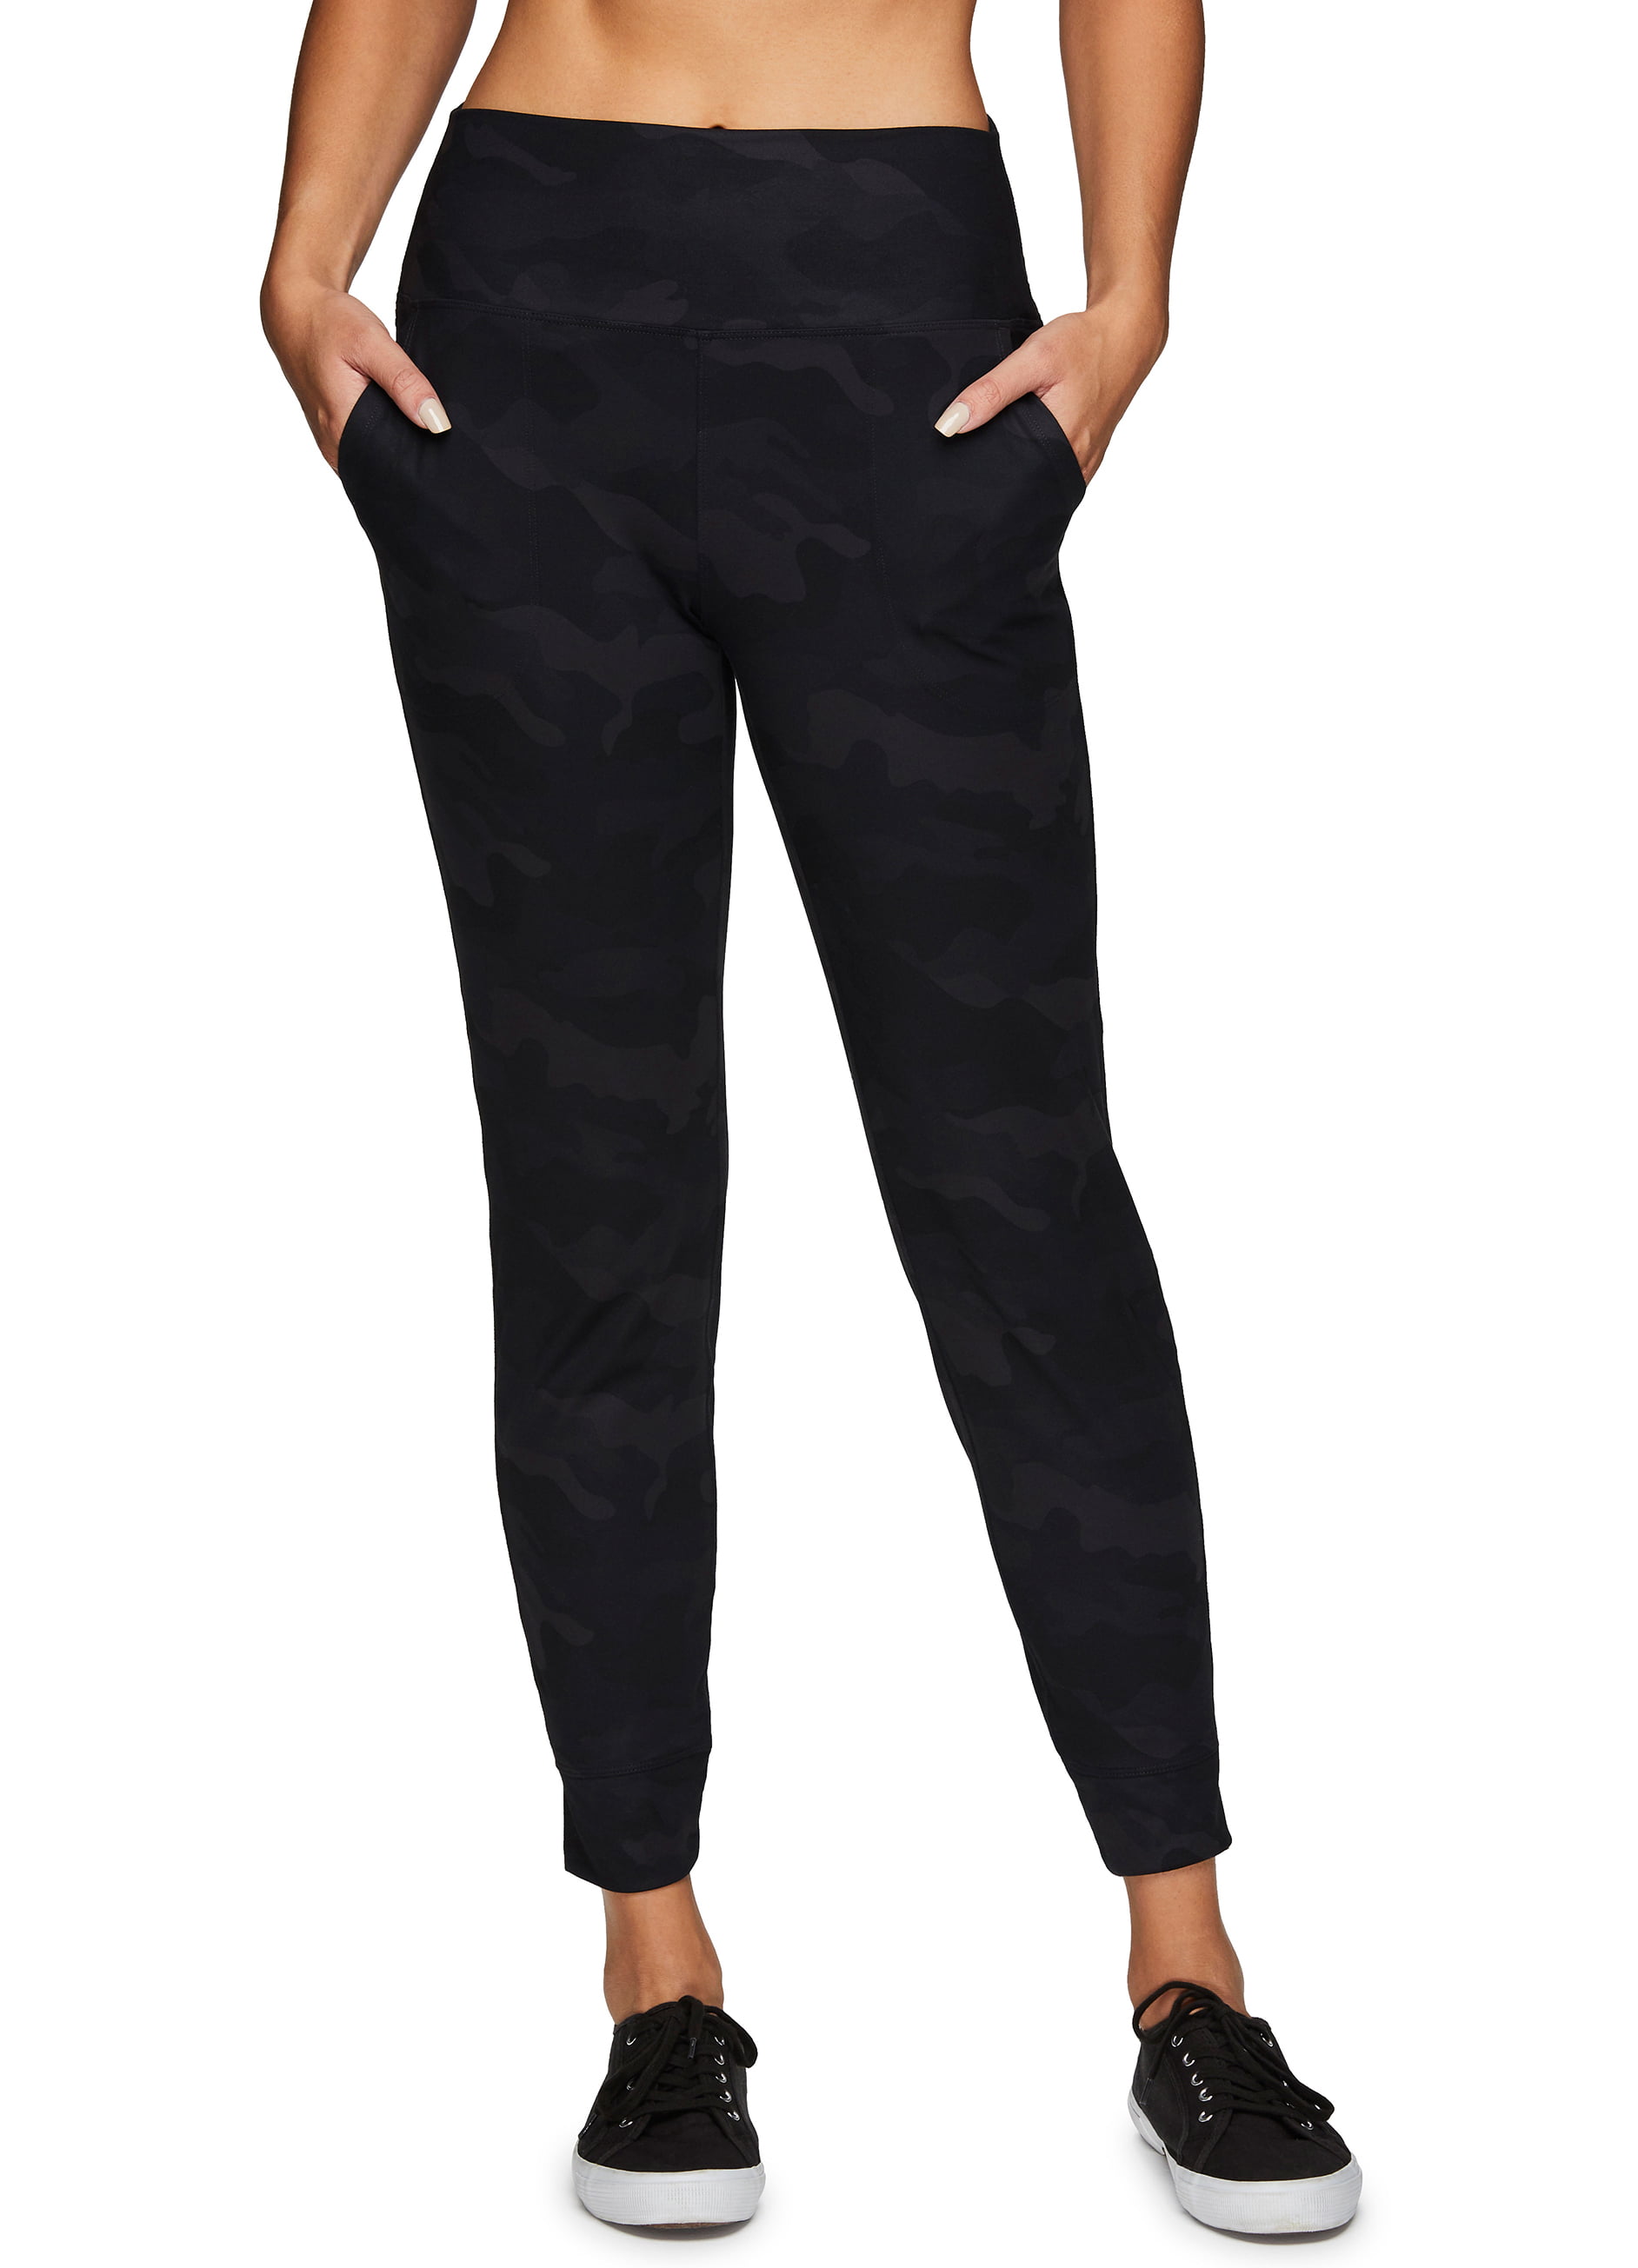 RBX Active Womens Camo Print Lightweight Jogger Sweatpants with Pockets